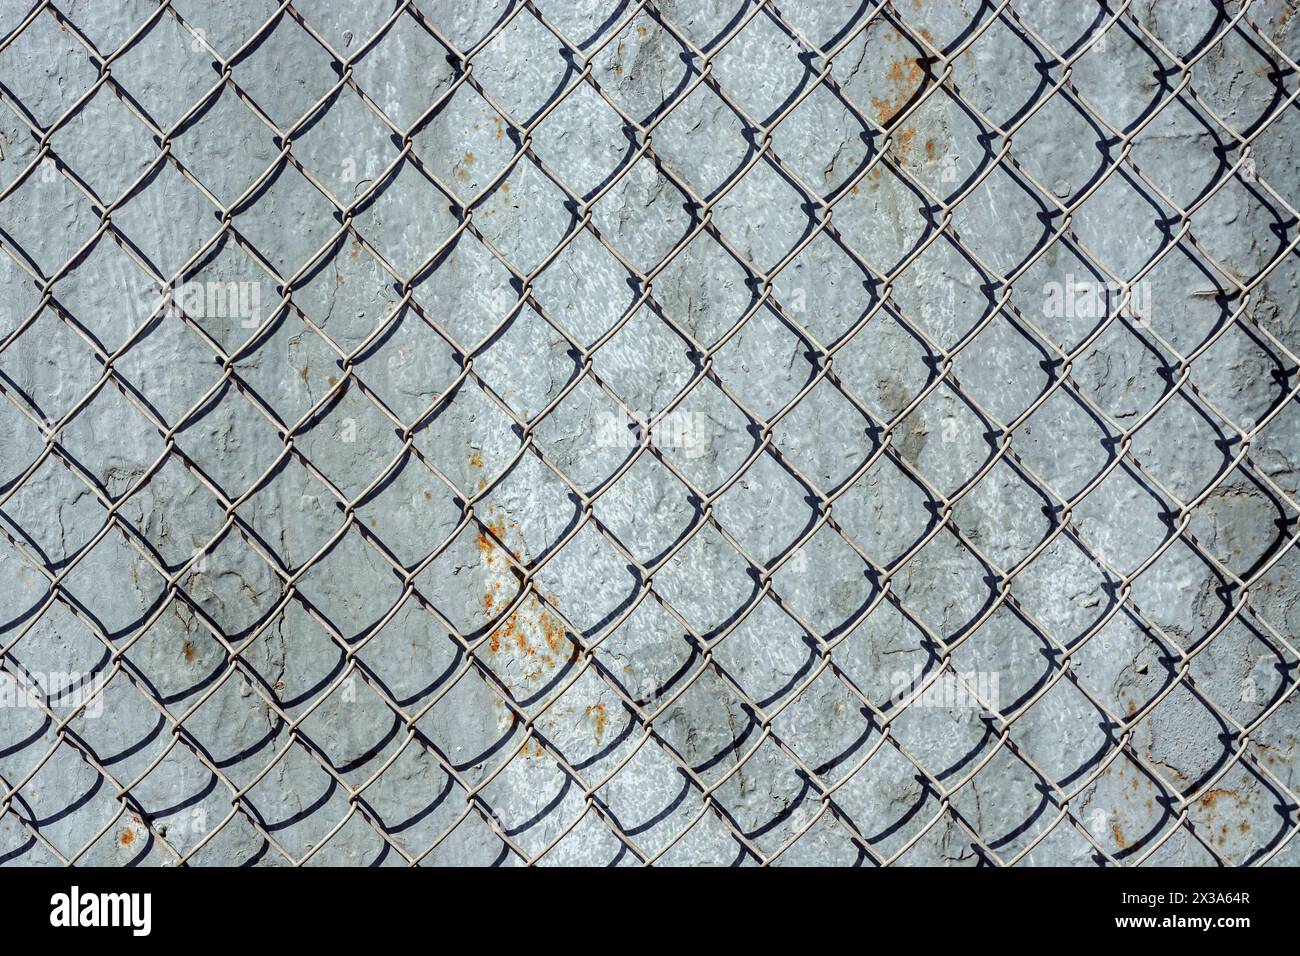 Fragment of an iron mesh with square cells against the background of a wall covered with peeling gray paint with rust, for use as an abstract backgrou Stock Photo